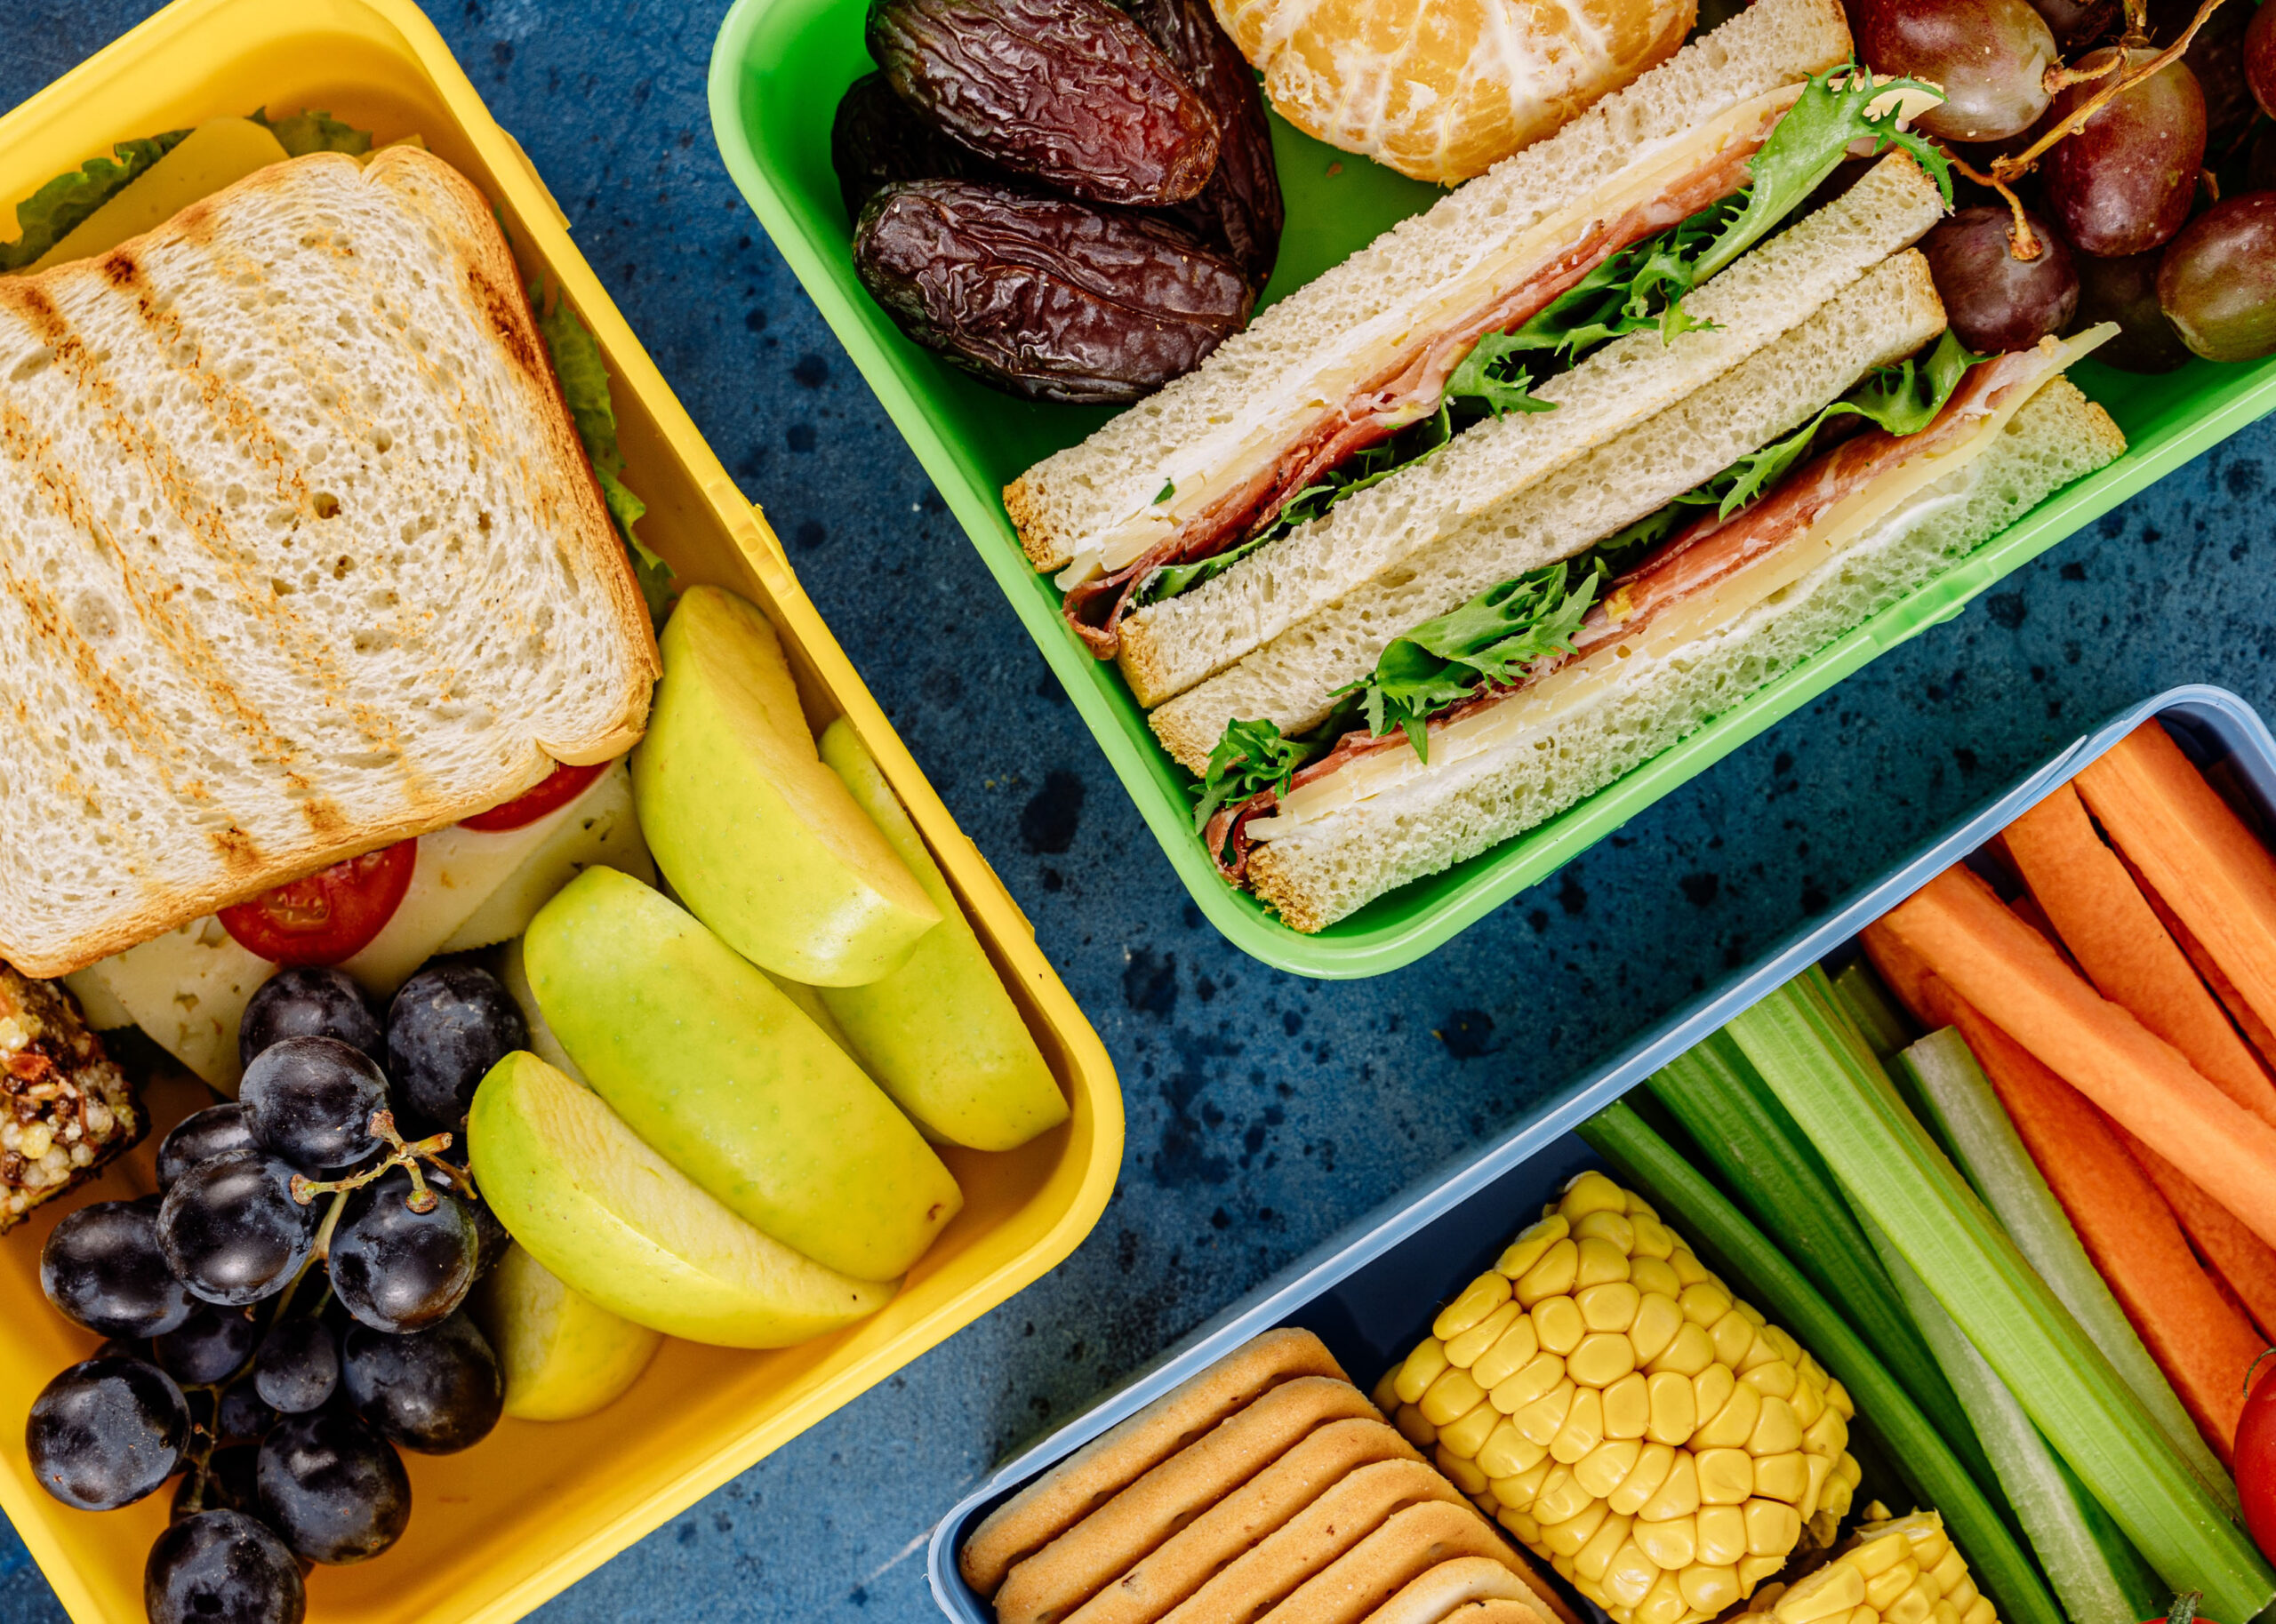 Healthy Packed Lunch by Antoni Shkraba:pexels.com